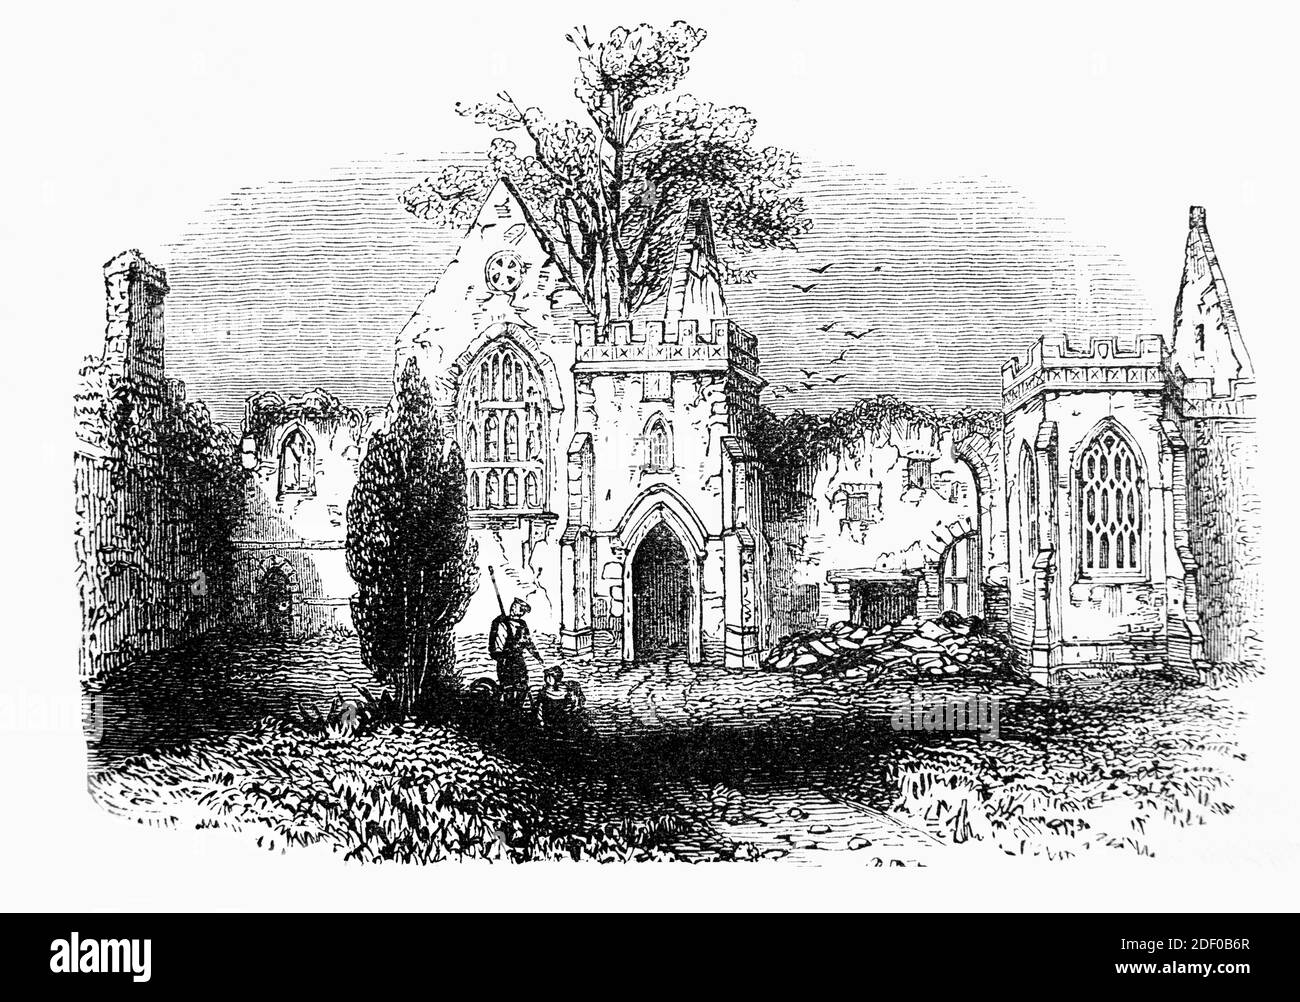 A 19th Century view of the ruins of Wingfield Manor, built in 1441 for the Treasurer to Henry VI, Sir Ralph Cromwell, near the village of South Wingfield,  Derbyshire, England. John Talbot, the second Earl of Shrewsbury, bought the property and his successors maintained the manor for the next two hundred years. At the time of the English Civil War, the manor was in the hands of Philip Herbert, 4th Earl of Pembroke, a Parliament supporter. The manor was taken by the Royalists in 1643 and then, after a short siege, retaken by Parliament in August 1644. Several large siege engines destroyed part. Stock Photo